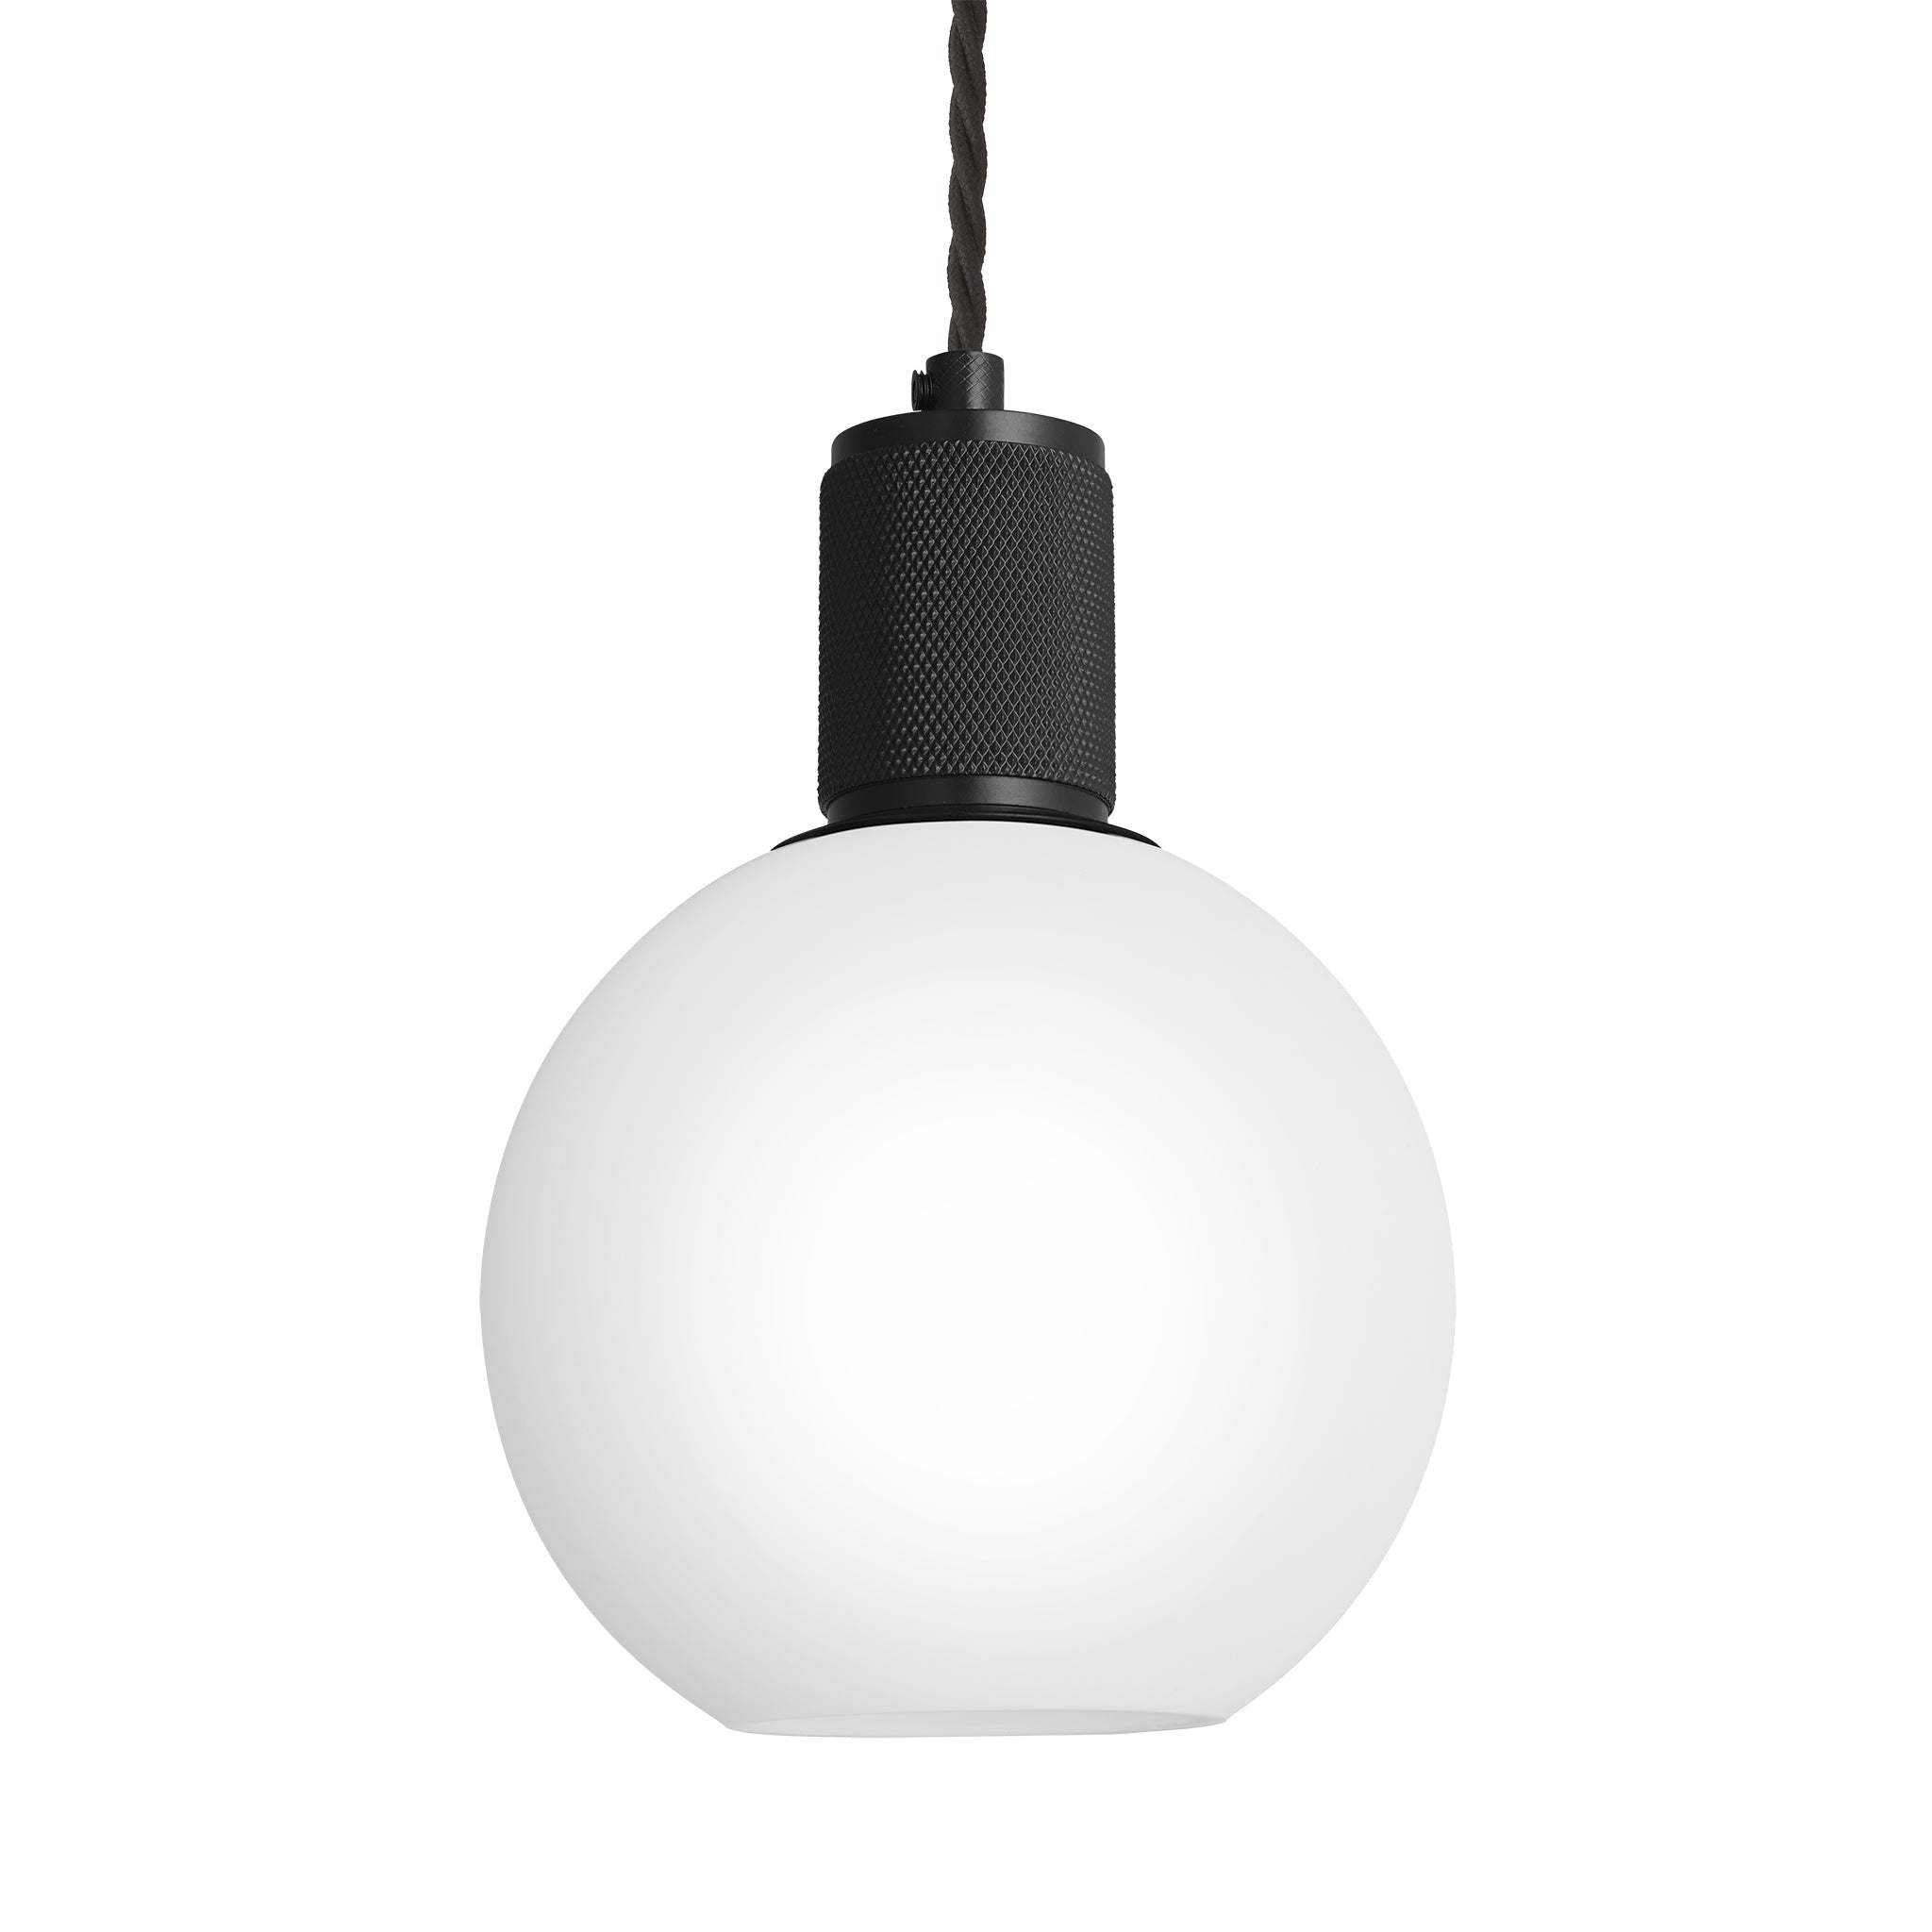 Industville Knurled Opal Glass Globe Pendant Light In White With Black Holder Outlet Small